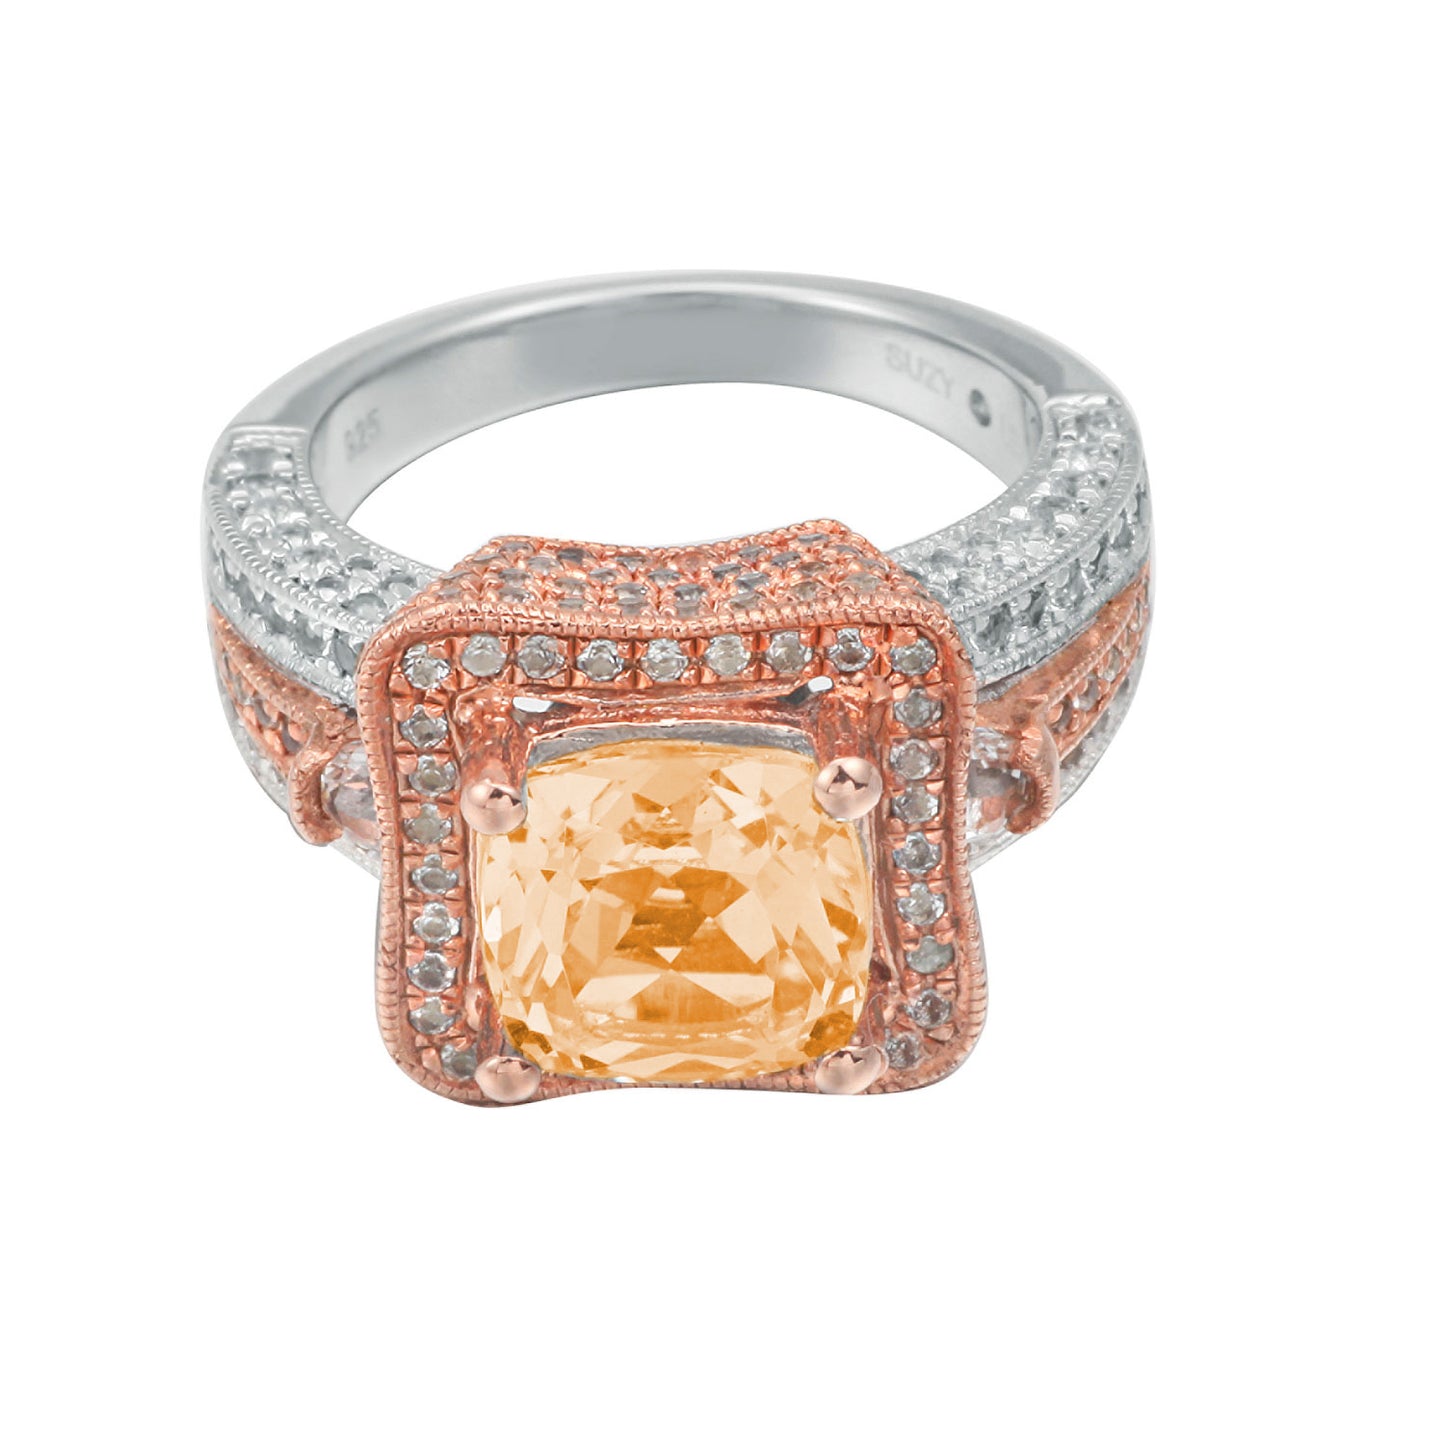 Suzy Levian Two-Tone Sterling Silver 5.57 cttw Cushion Cut Orange Citrine Ring